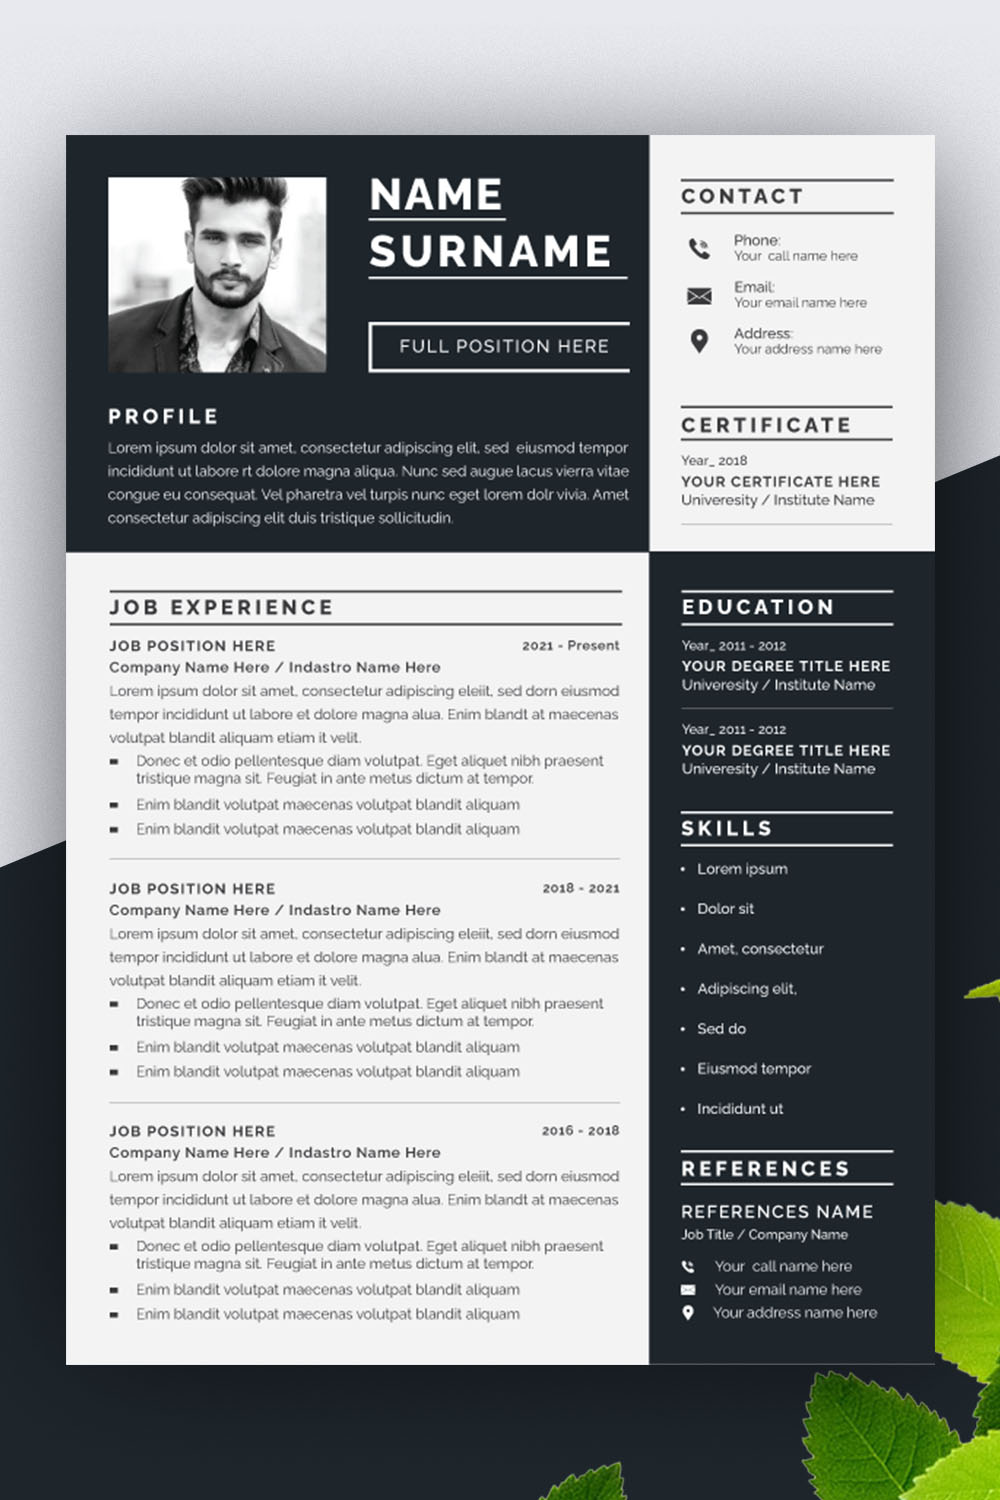 Resume Design Layout Template pinterest preview image.